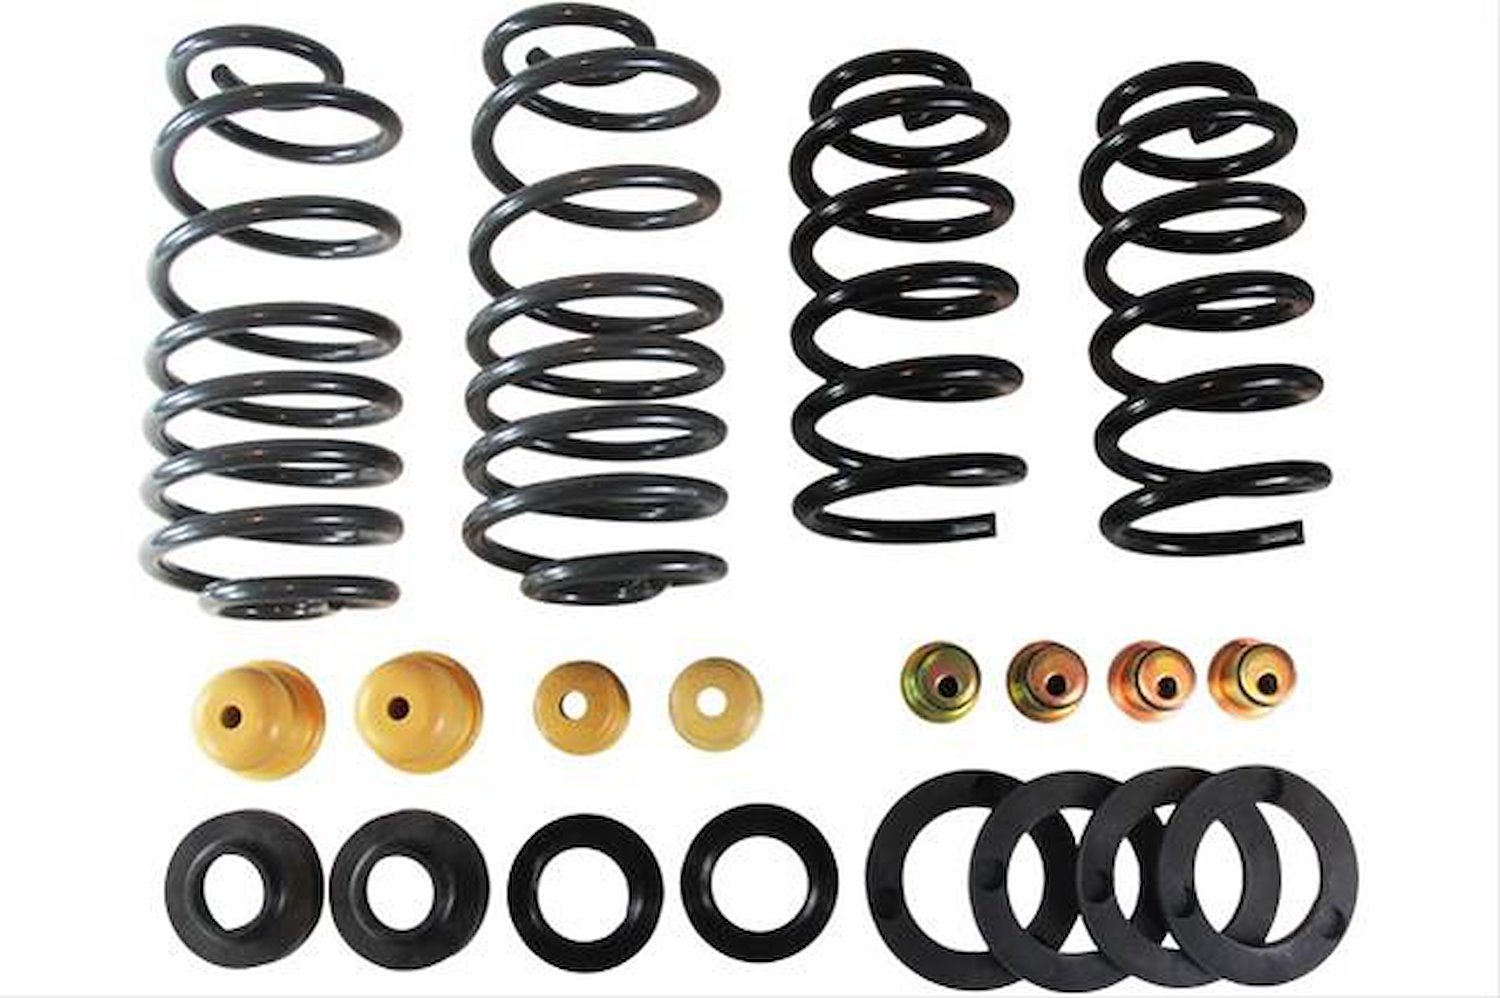 Complete Lowering Kit for 2015-Up Chevy Tahoe/GMC Yukon/Cadillac Escalade